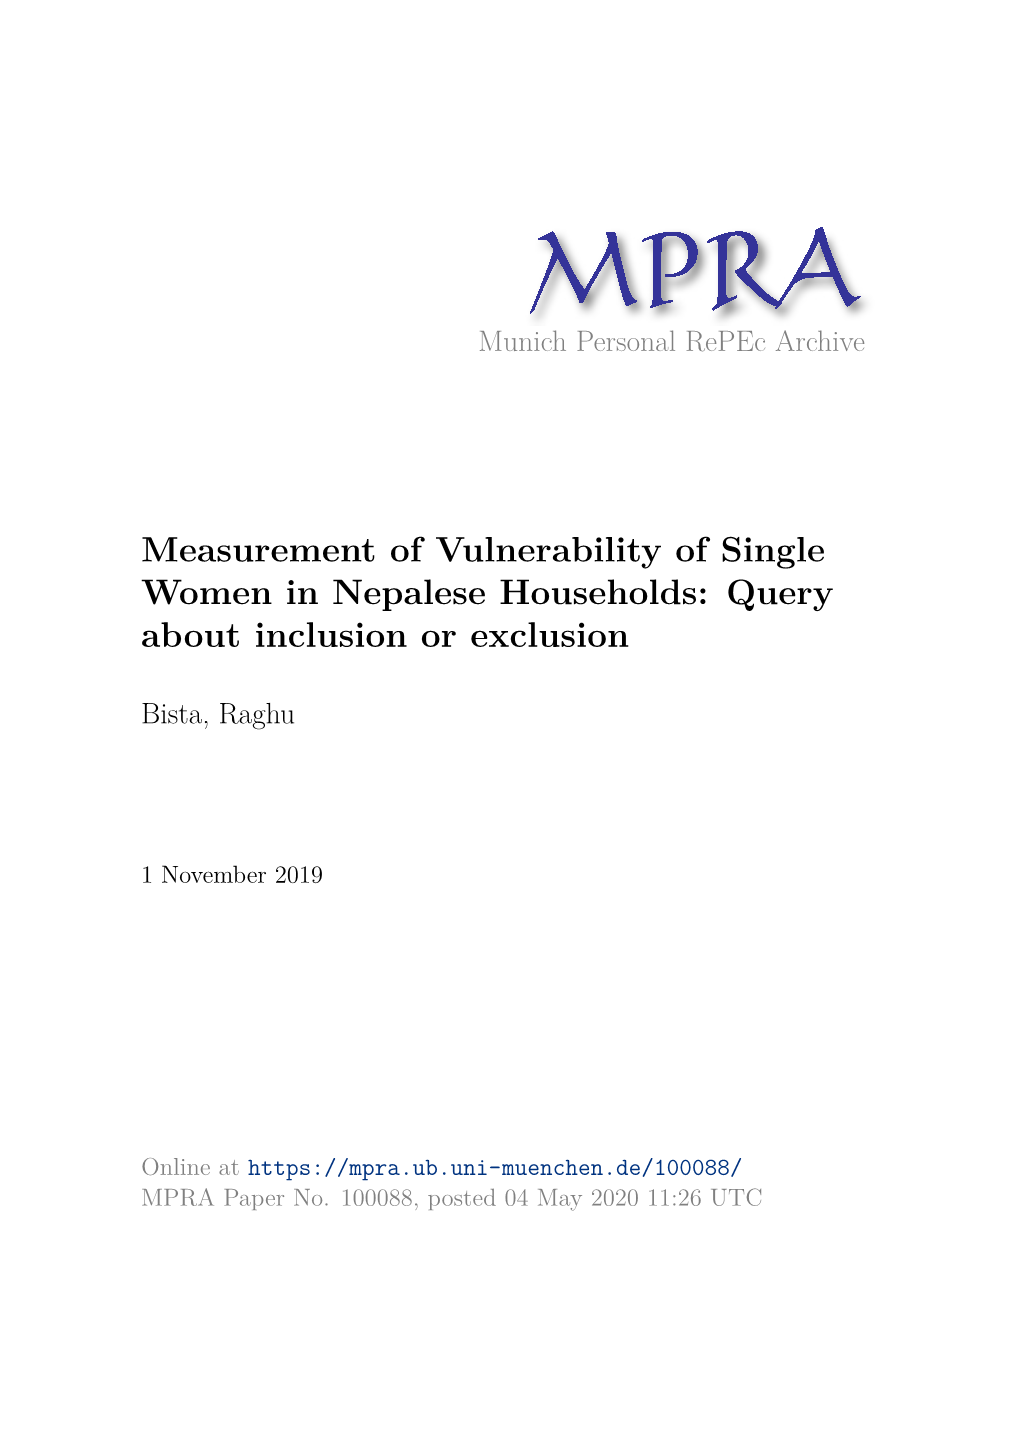 Measurement of Vulnerability of Single Women in Nepalese Households: Query About Inclusion Or Exclusion